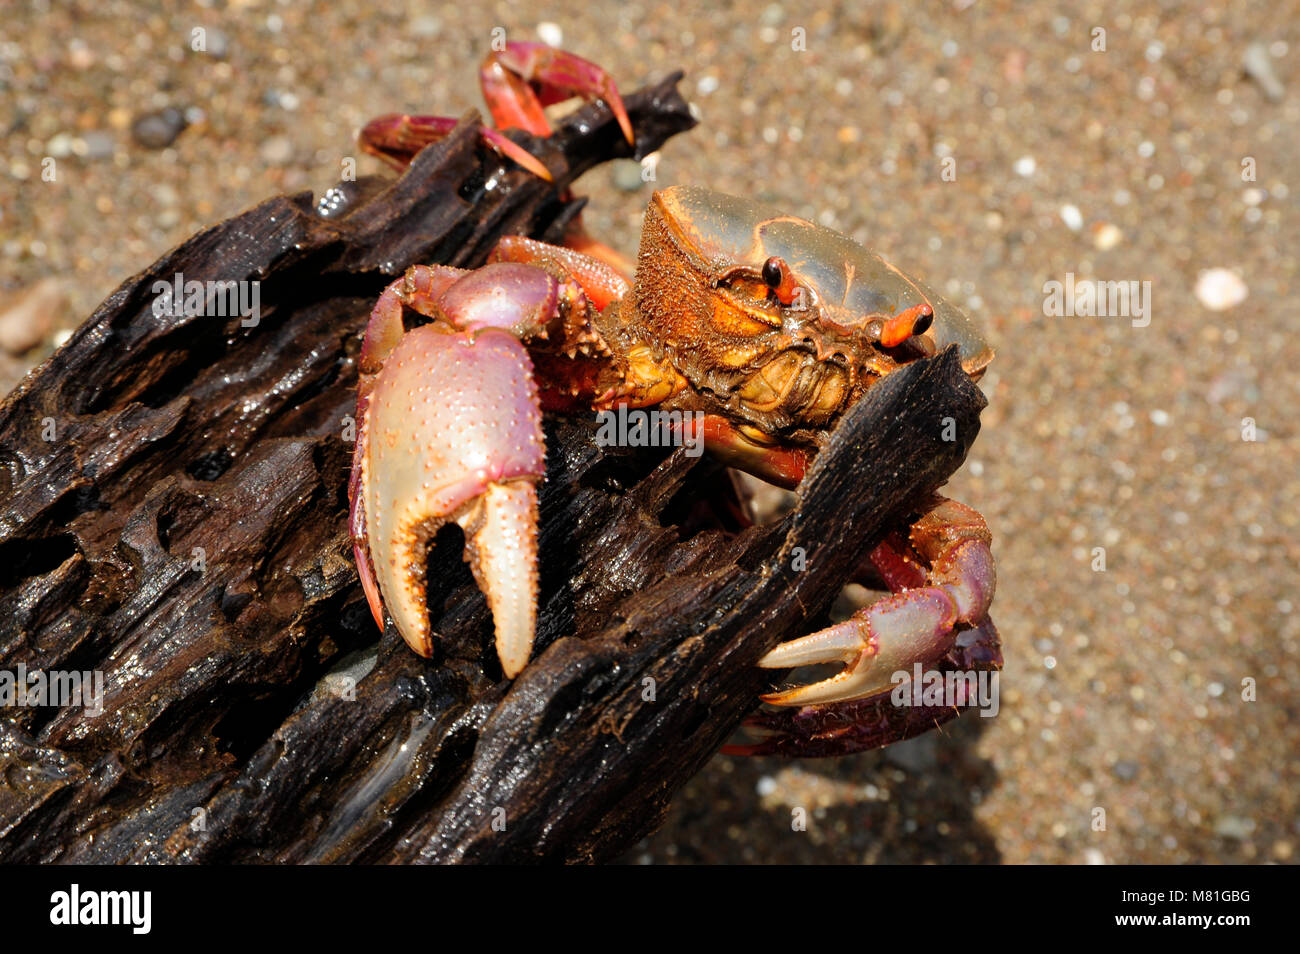 The colorful land crab Gecarcinus quadratus, also known as the halloween crab, makes its way along Paloma Beach in Costa Rica. Stock Photo